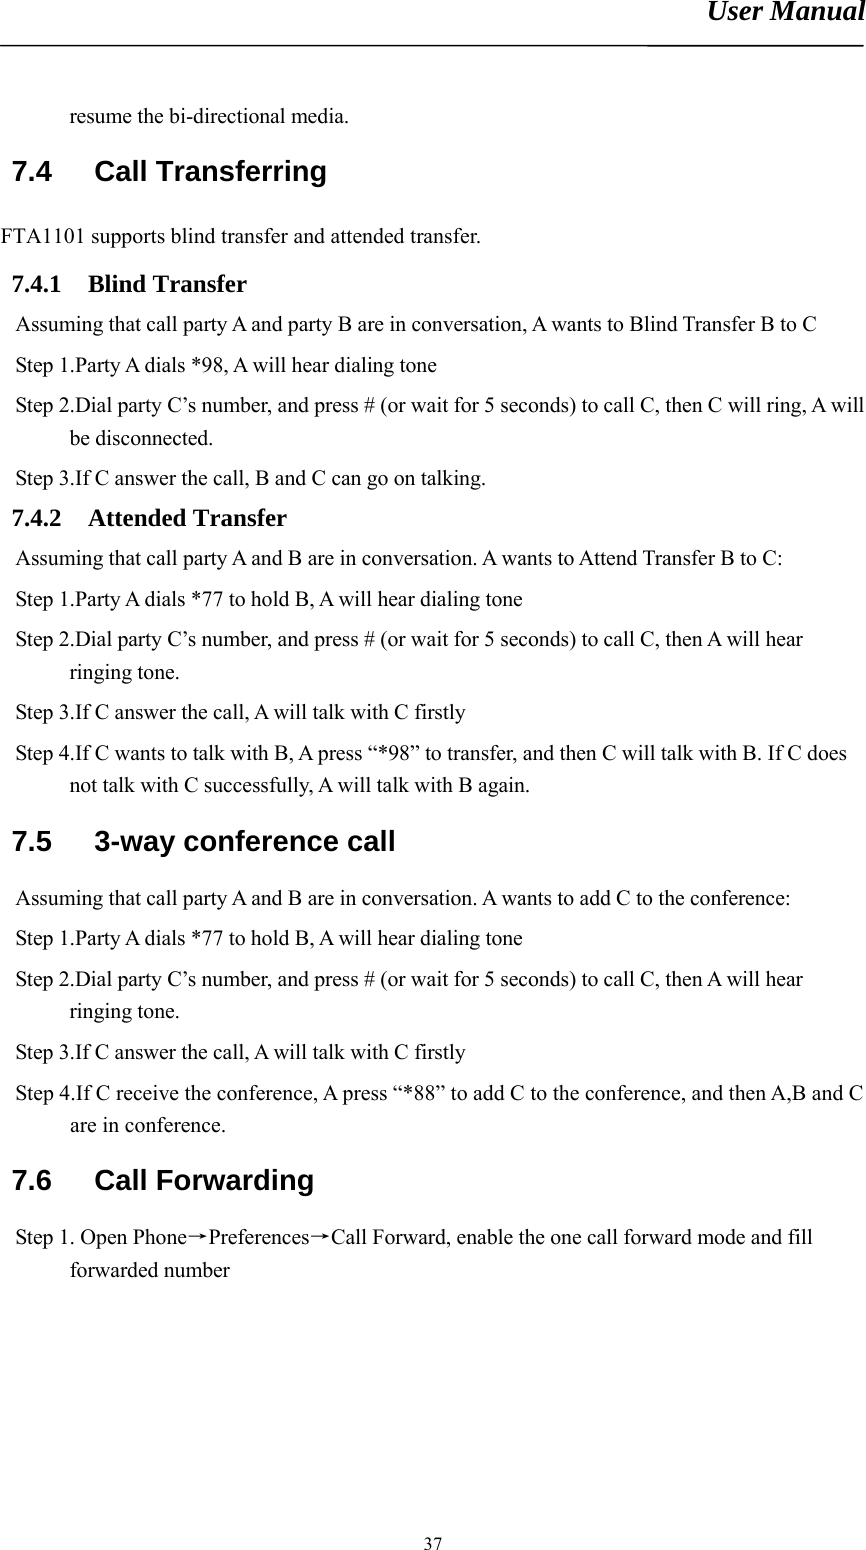 User Manual       37resume the bi-directional media. 7.4 Call Transferring FTA1101 supports blind transfer and attended transfer. 7.4.1 Blind Transfer Assuming that call party A and party B are in conversation, A wants to Blind Transfer B to C Step 1.Party A dials *98, A will hear dialing tone Step 2.Dial party C’s number, and press # (or wait for 5 seconds) to call C, then C will ring, A will be disconnected. Step 3.If C answer the call, B and C can go on talking. 7.4.2 Attended Transfer Assuming that call party A and B are in conversation. A wants to Attend Transfer B to C: Step 1.Party A dials *77 to hold B, A will hear dialing tone Step 2.Dial party C’s number, and press # (or wait for 5 seconds) to call C, then A will hear ringing tone. Step 3.If C answer the call, A will talk with C firstly Step 4.If C wants to talk with B, A press “*98” to transfer, and then C will talk with B. If C does not talk with C successfully, A will talk with B again. 7.5  3-way conference call Assuming that call party A and B are in conversation. A wants to add C to the conference: Step 1.Party A dials *77 to hold B, A will hear dialing tone Step 2.Dial party C’s number, and press # (or wait for 5 seconds) to call C, then A will hear ringing tone. Step 3.If C answer the call, A will talk with C firstly Step 4.If C receive the conference, A press “*88” to add C to the conference, and then A,B and C are in conference. 7.6 Call Forwarding Step 1. Open Phone→Preferences→Call Forward, enable the one call forward mode and fill forwarded number 